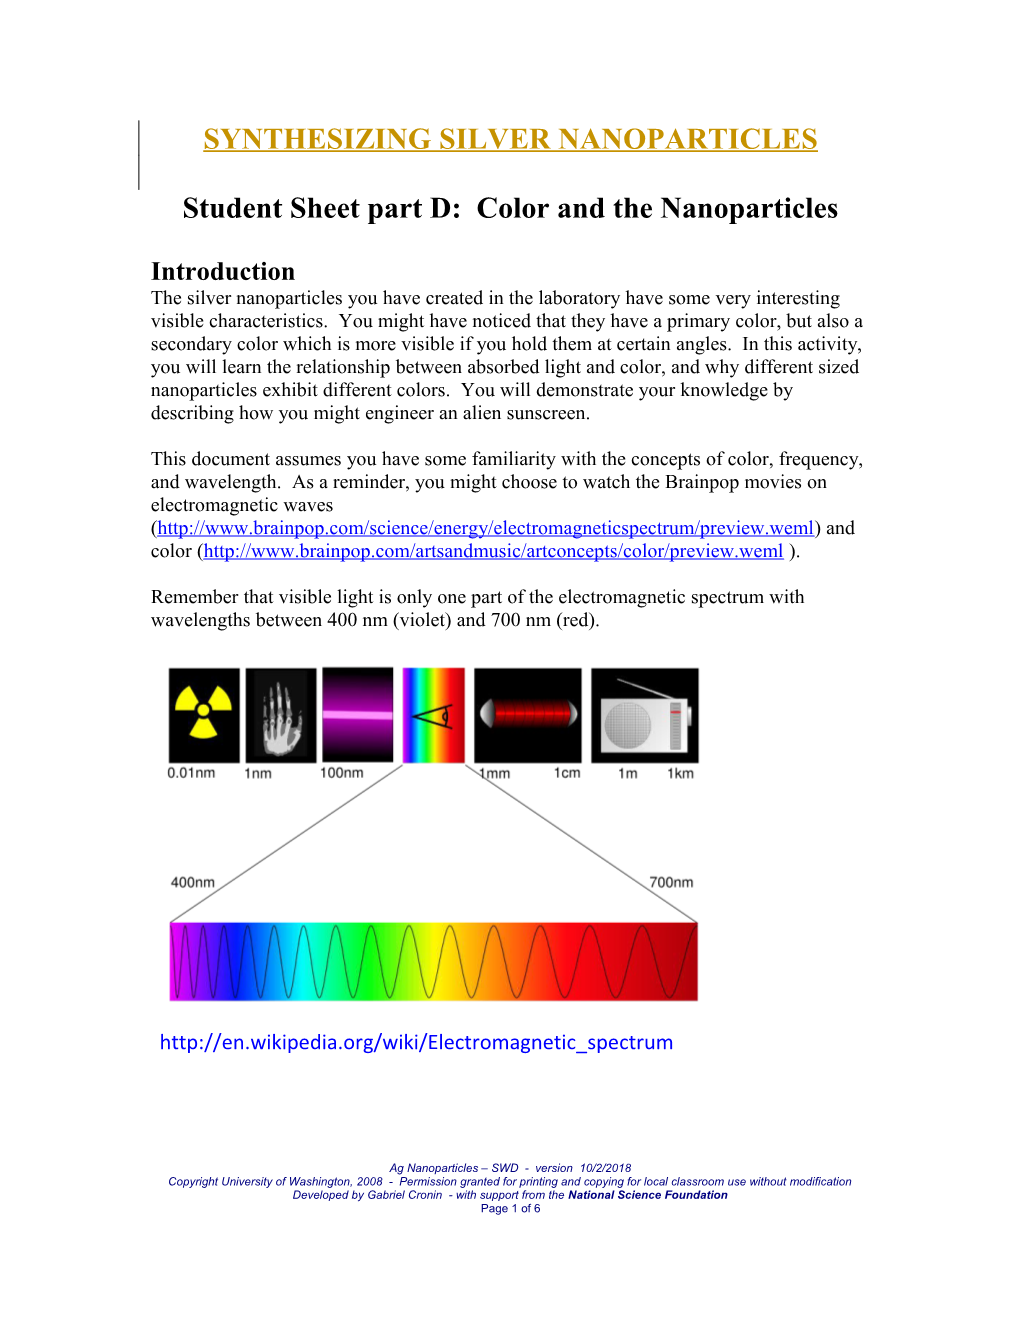 Student Sheet Part D: Color and the Nanoparticles